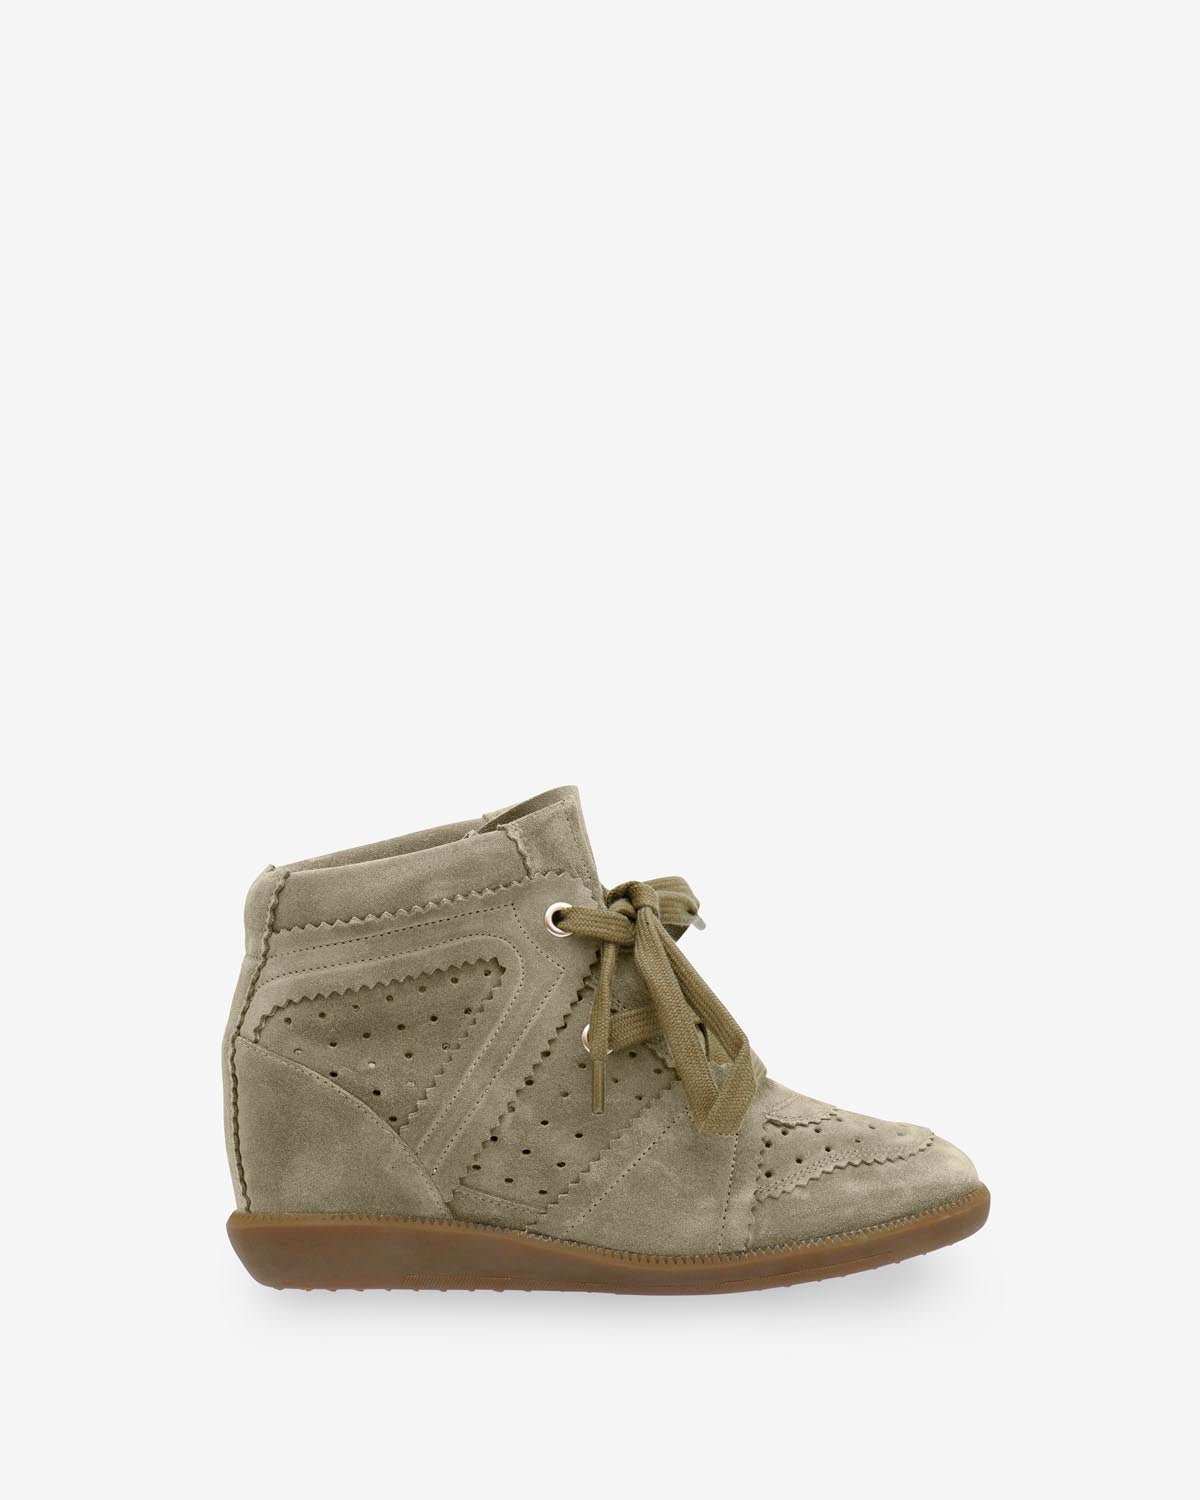 Bobby sneakers Woman Taupe 11